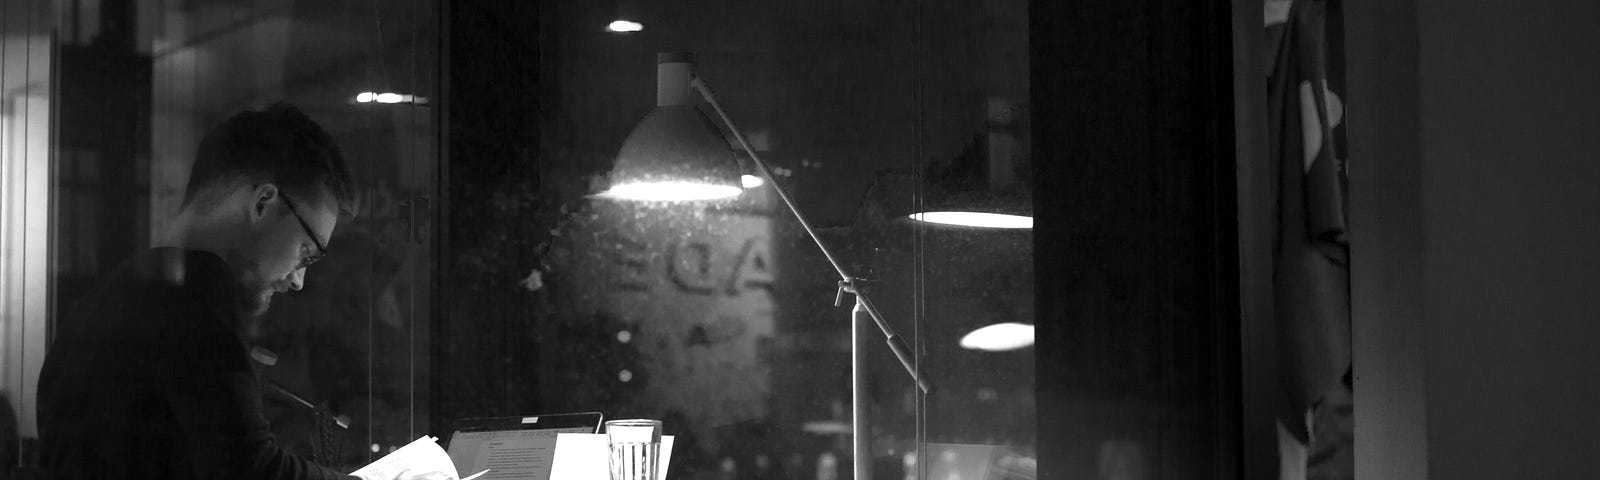 A man reads at night in a cafe